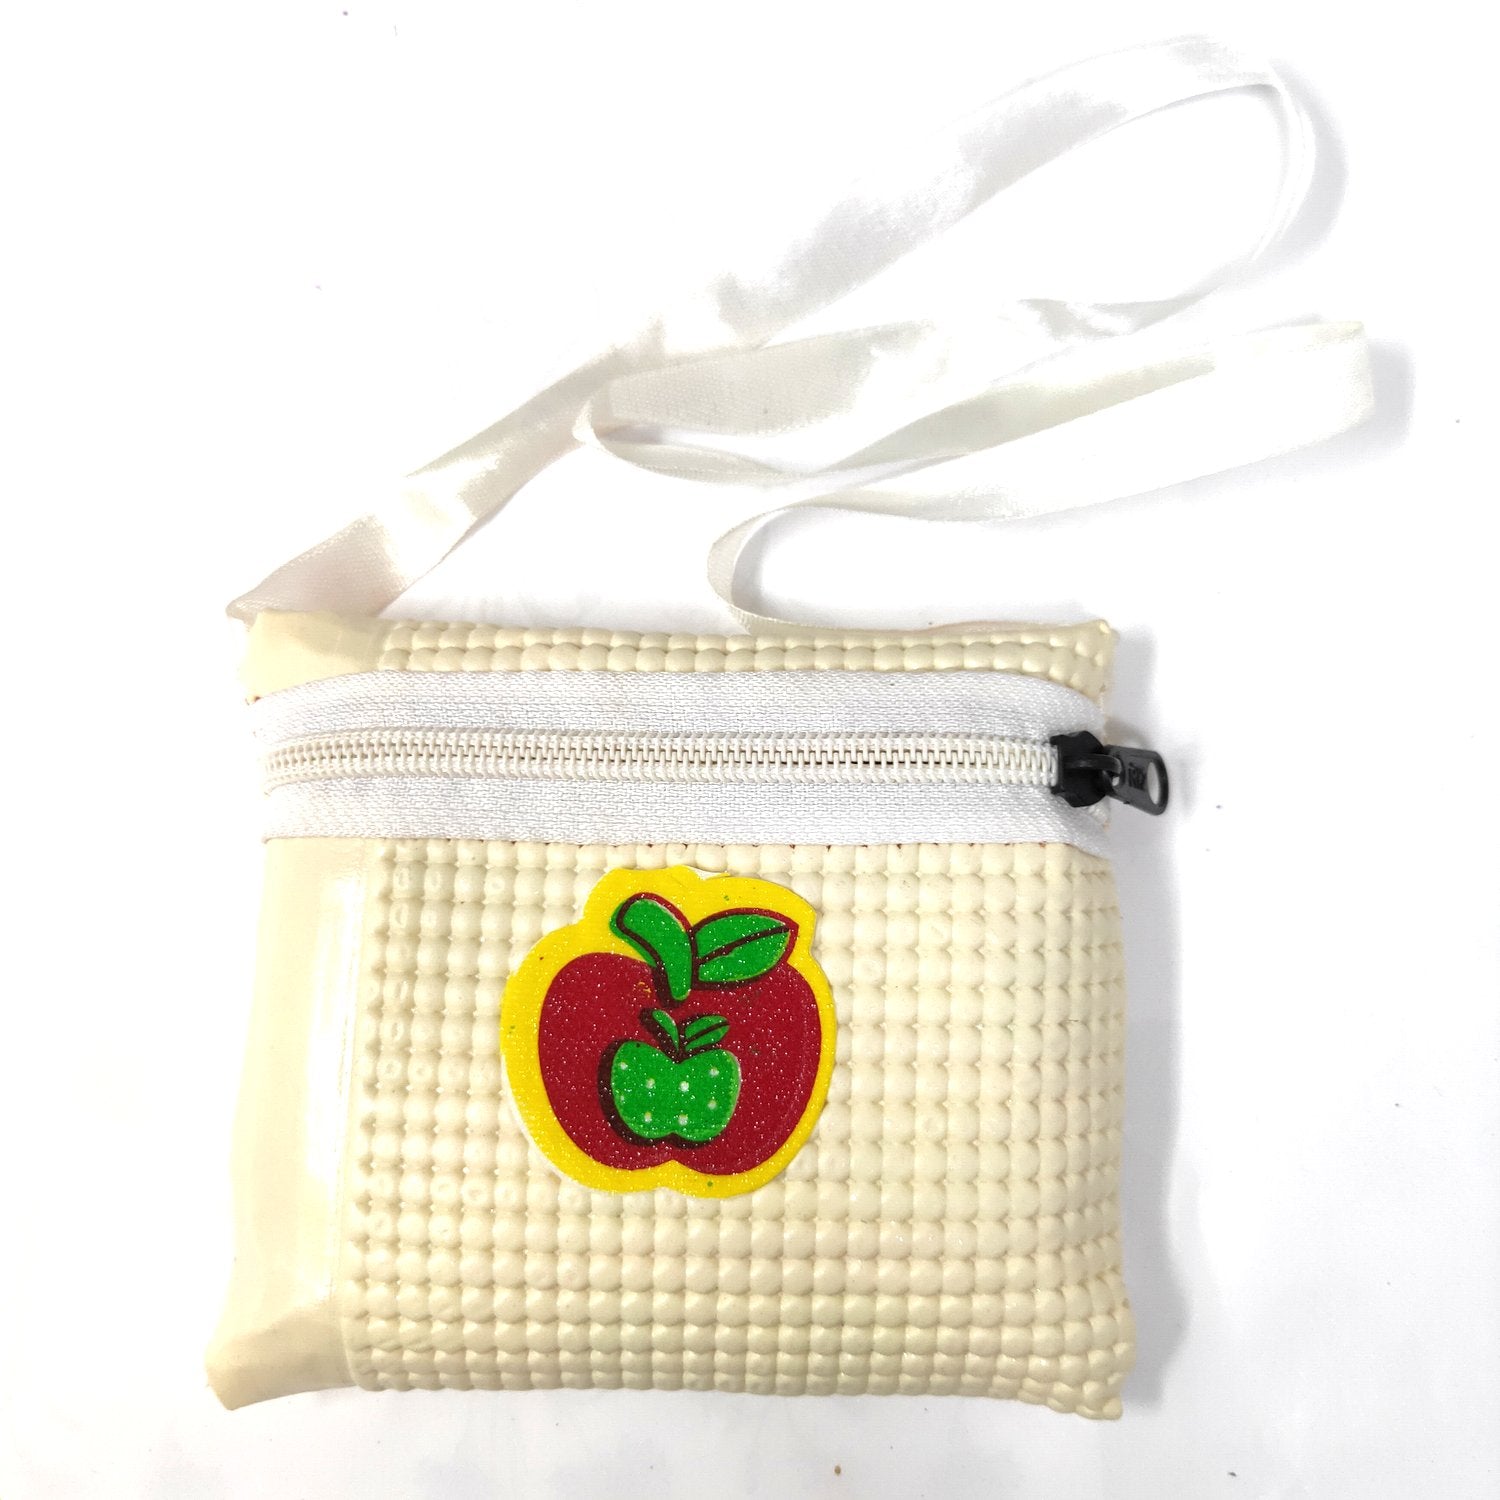 Buy Ivory Princess Purse Small Hand Bag for Little Girl - 7